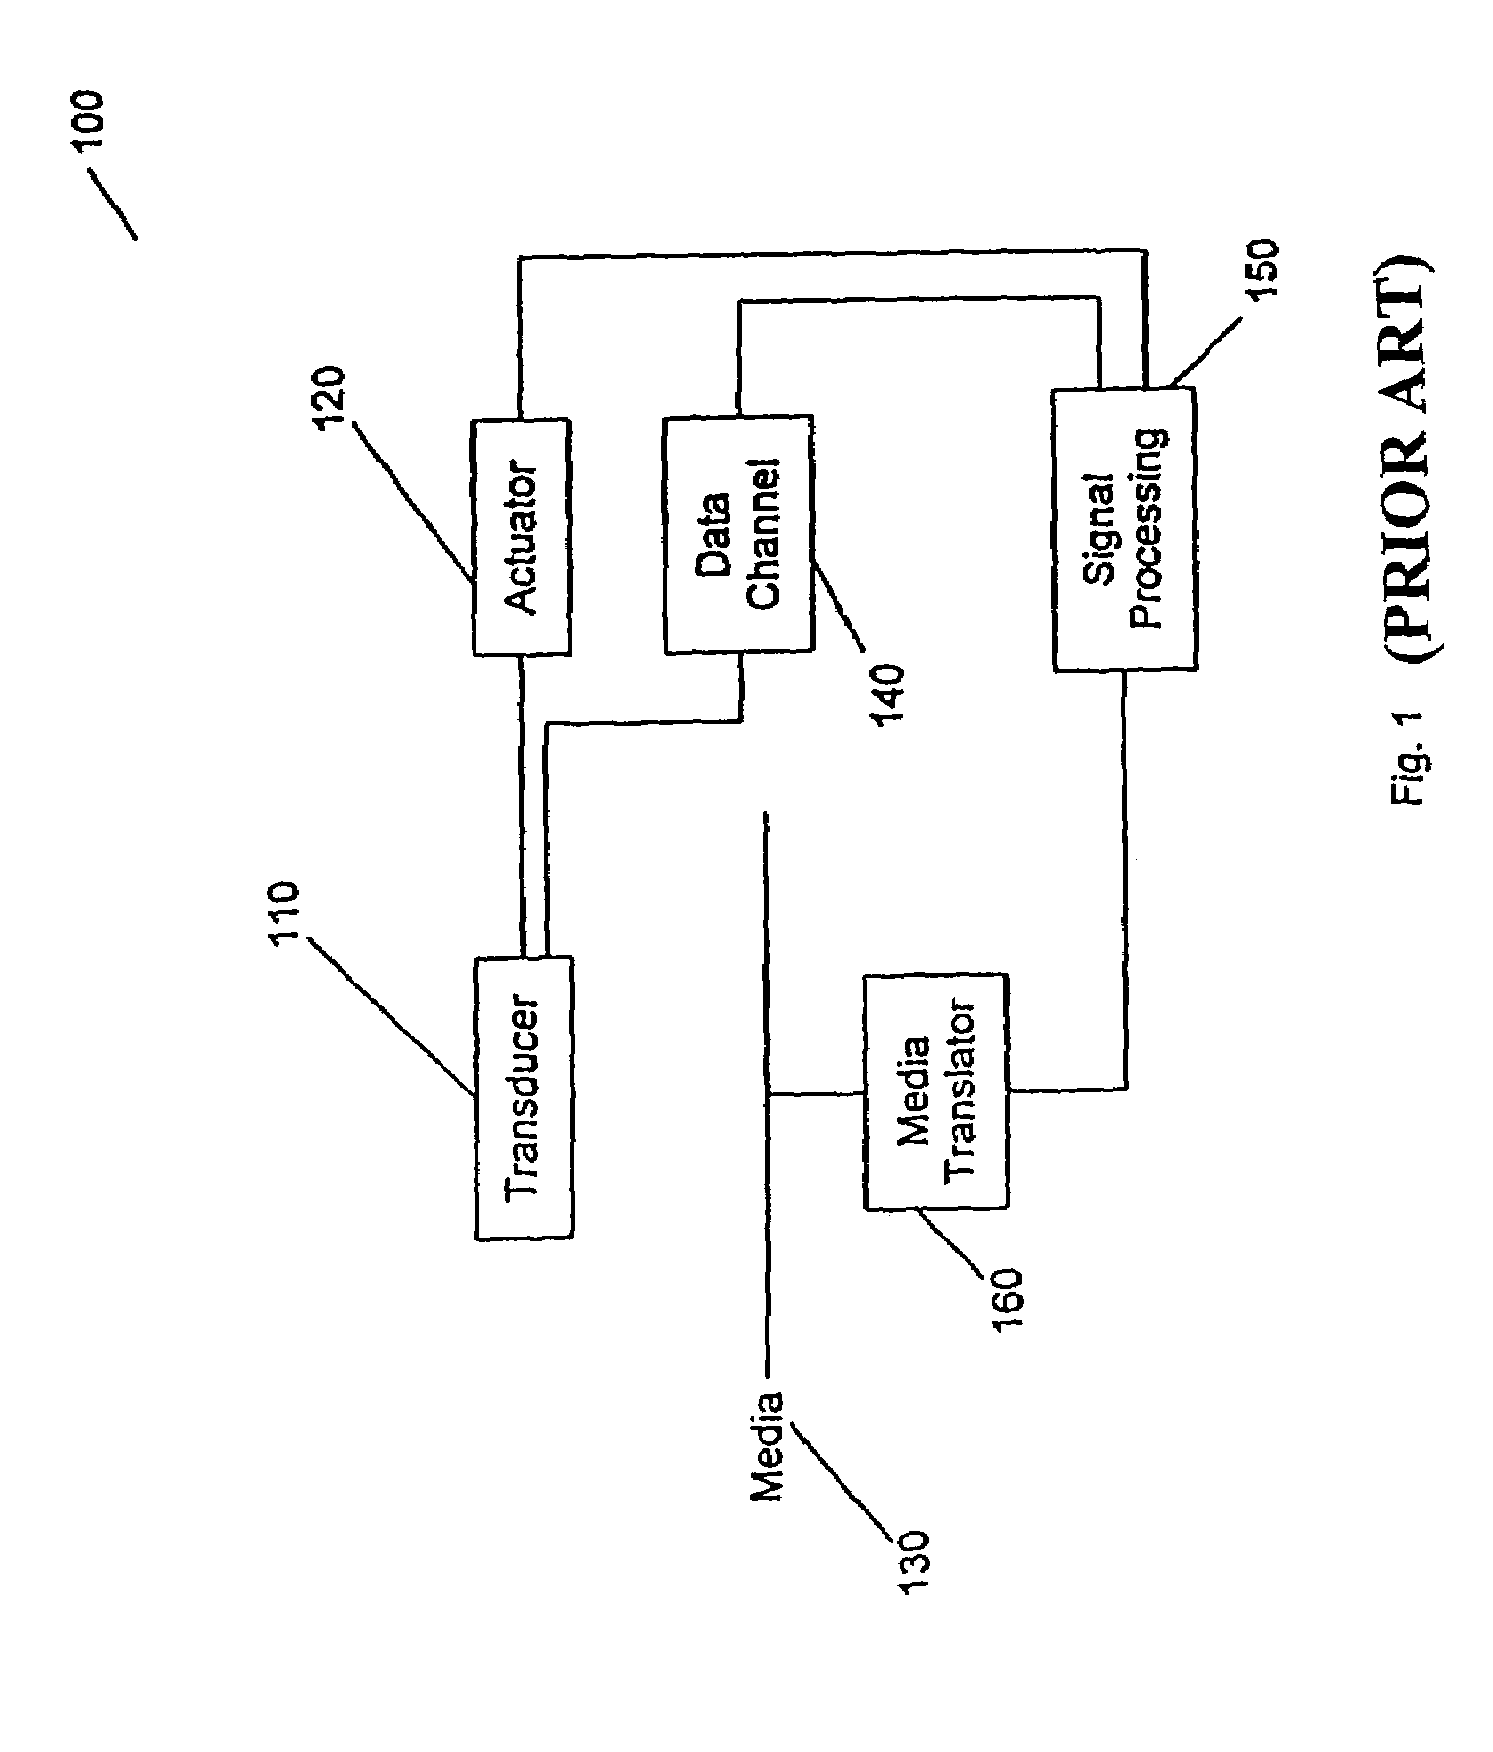 Method and apparatus for achieving physical connection between the flux guide and the free layer and that insulates the flux guide from the shields